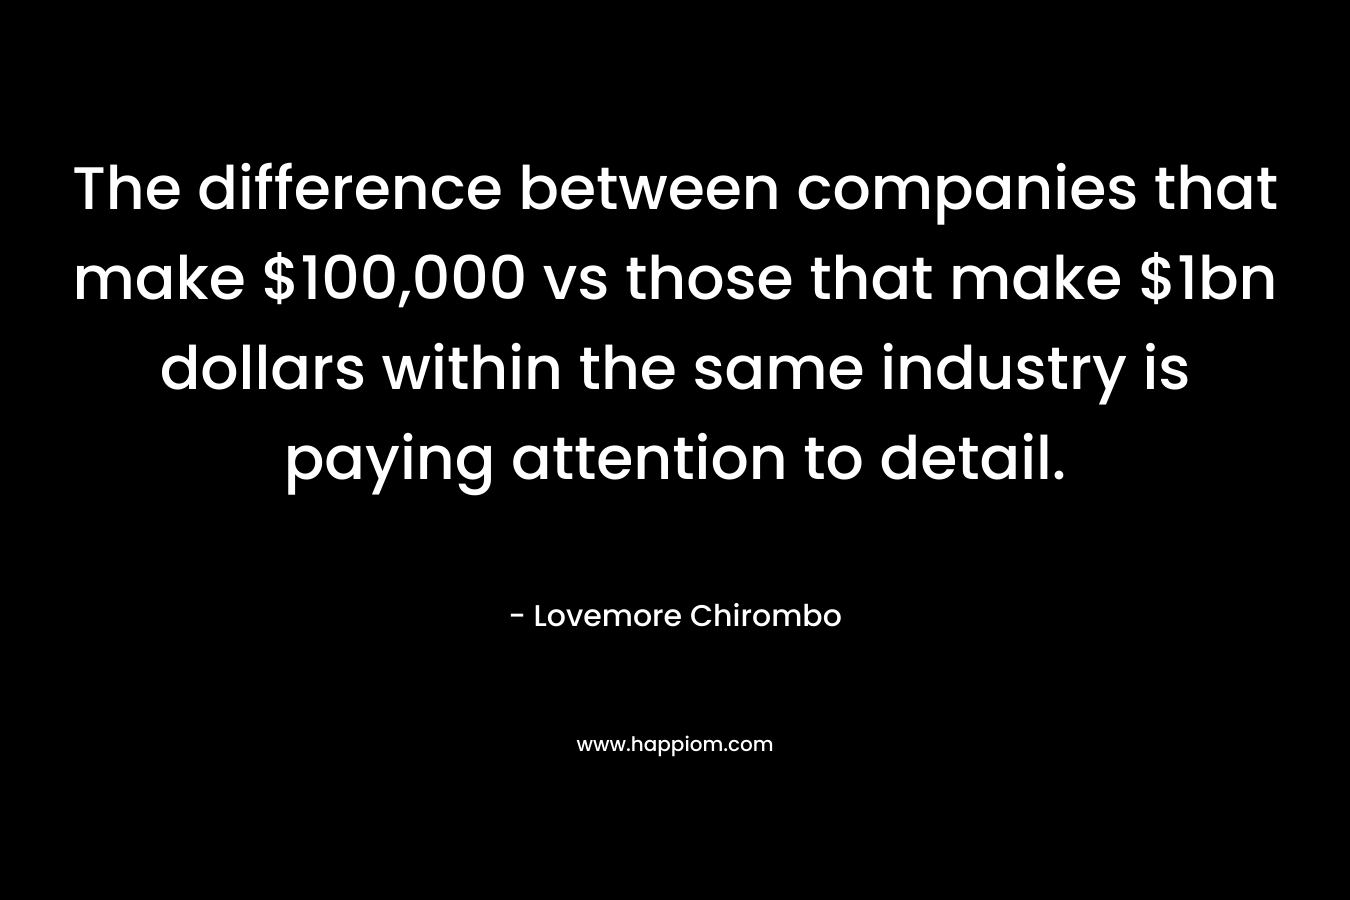 The difference between companies that make $100,000 vs those that make $1bn dollars within the same industry is paying attention to detail.